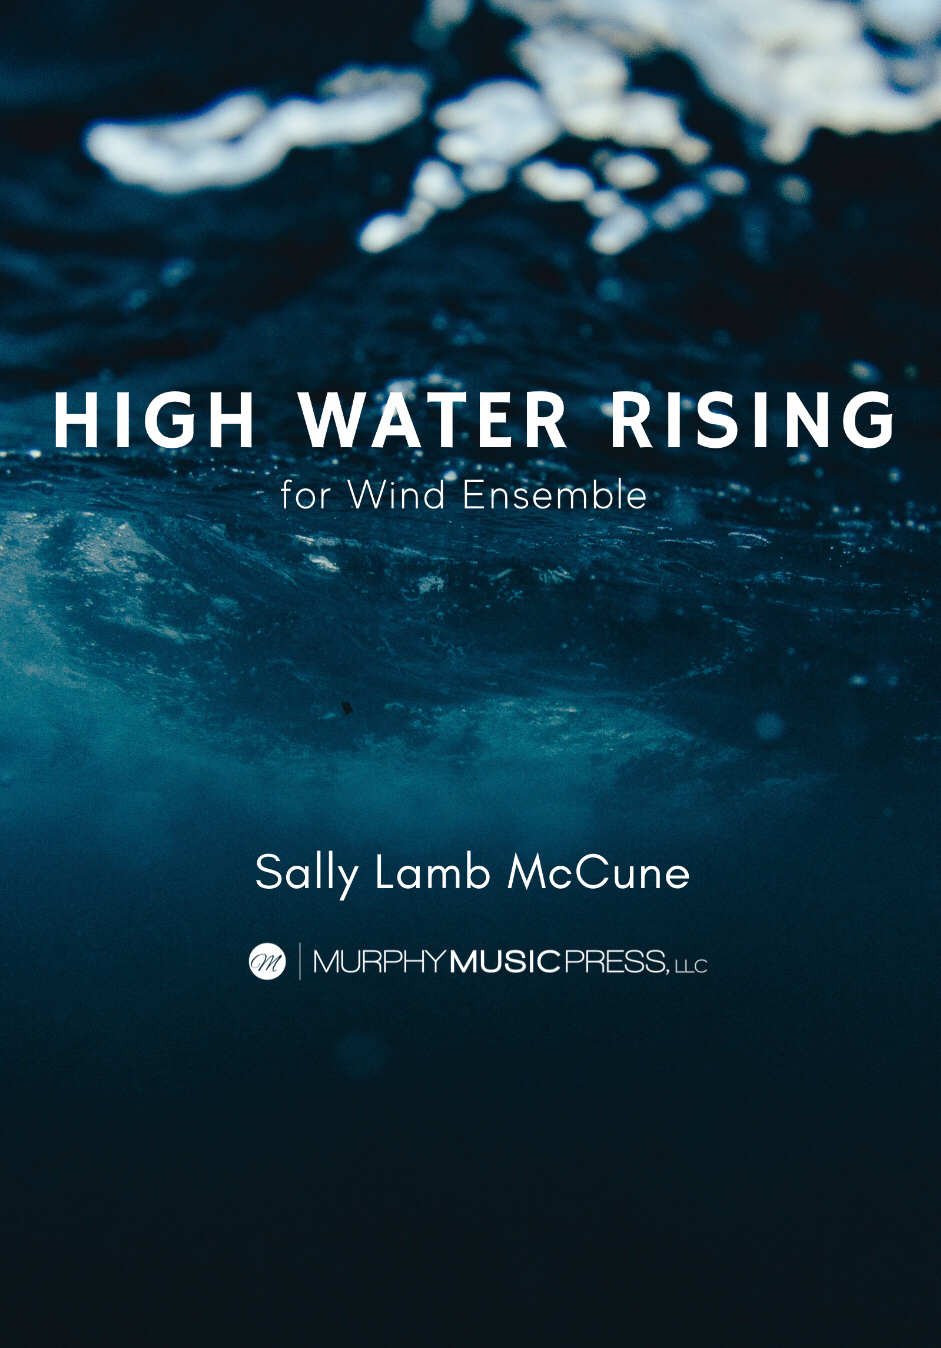 High Water Rising by Sally Lamb McCune